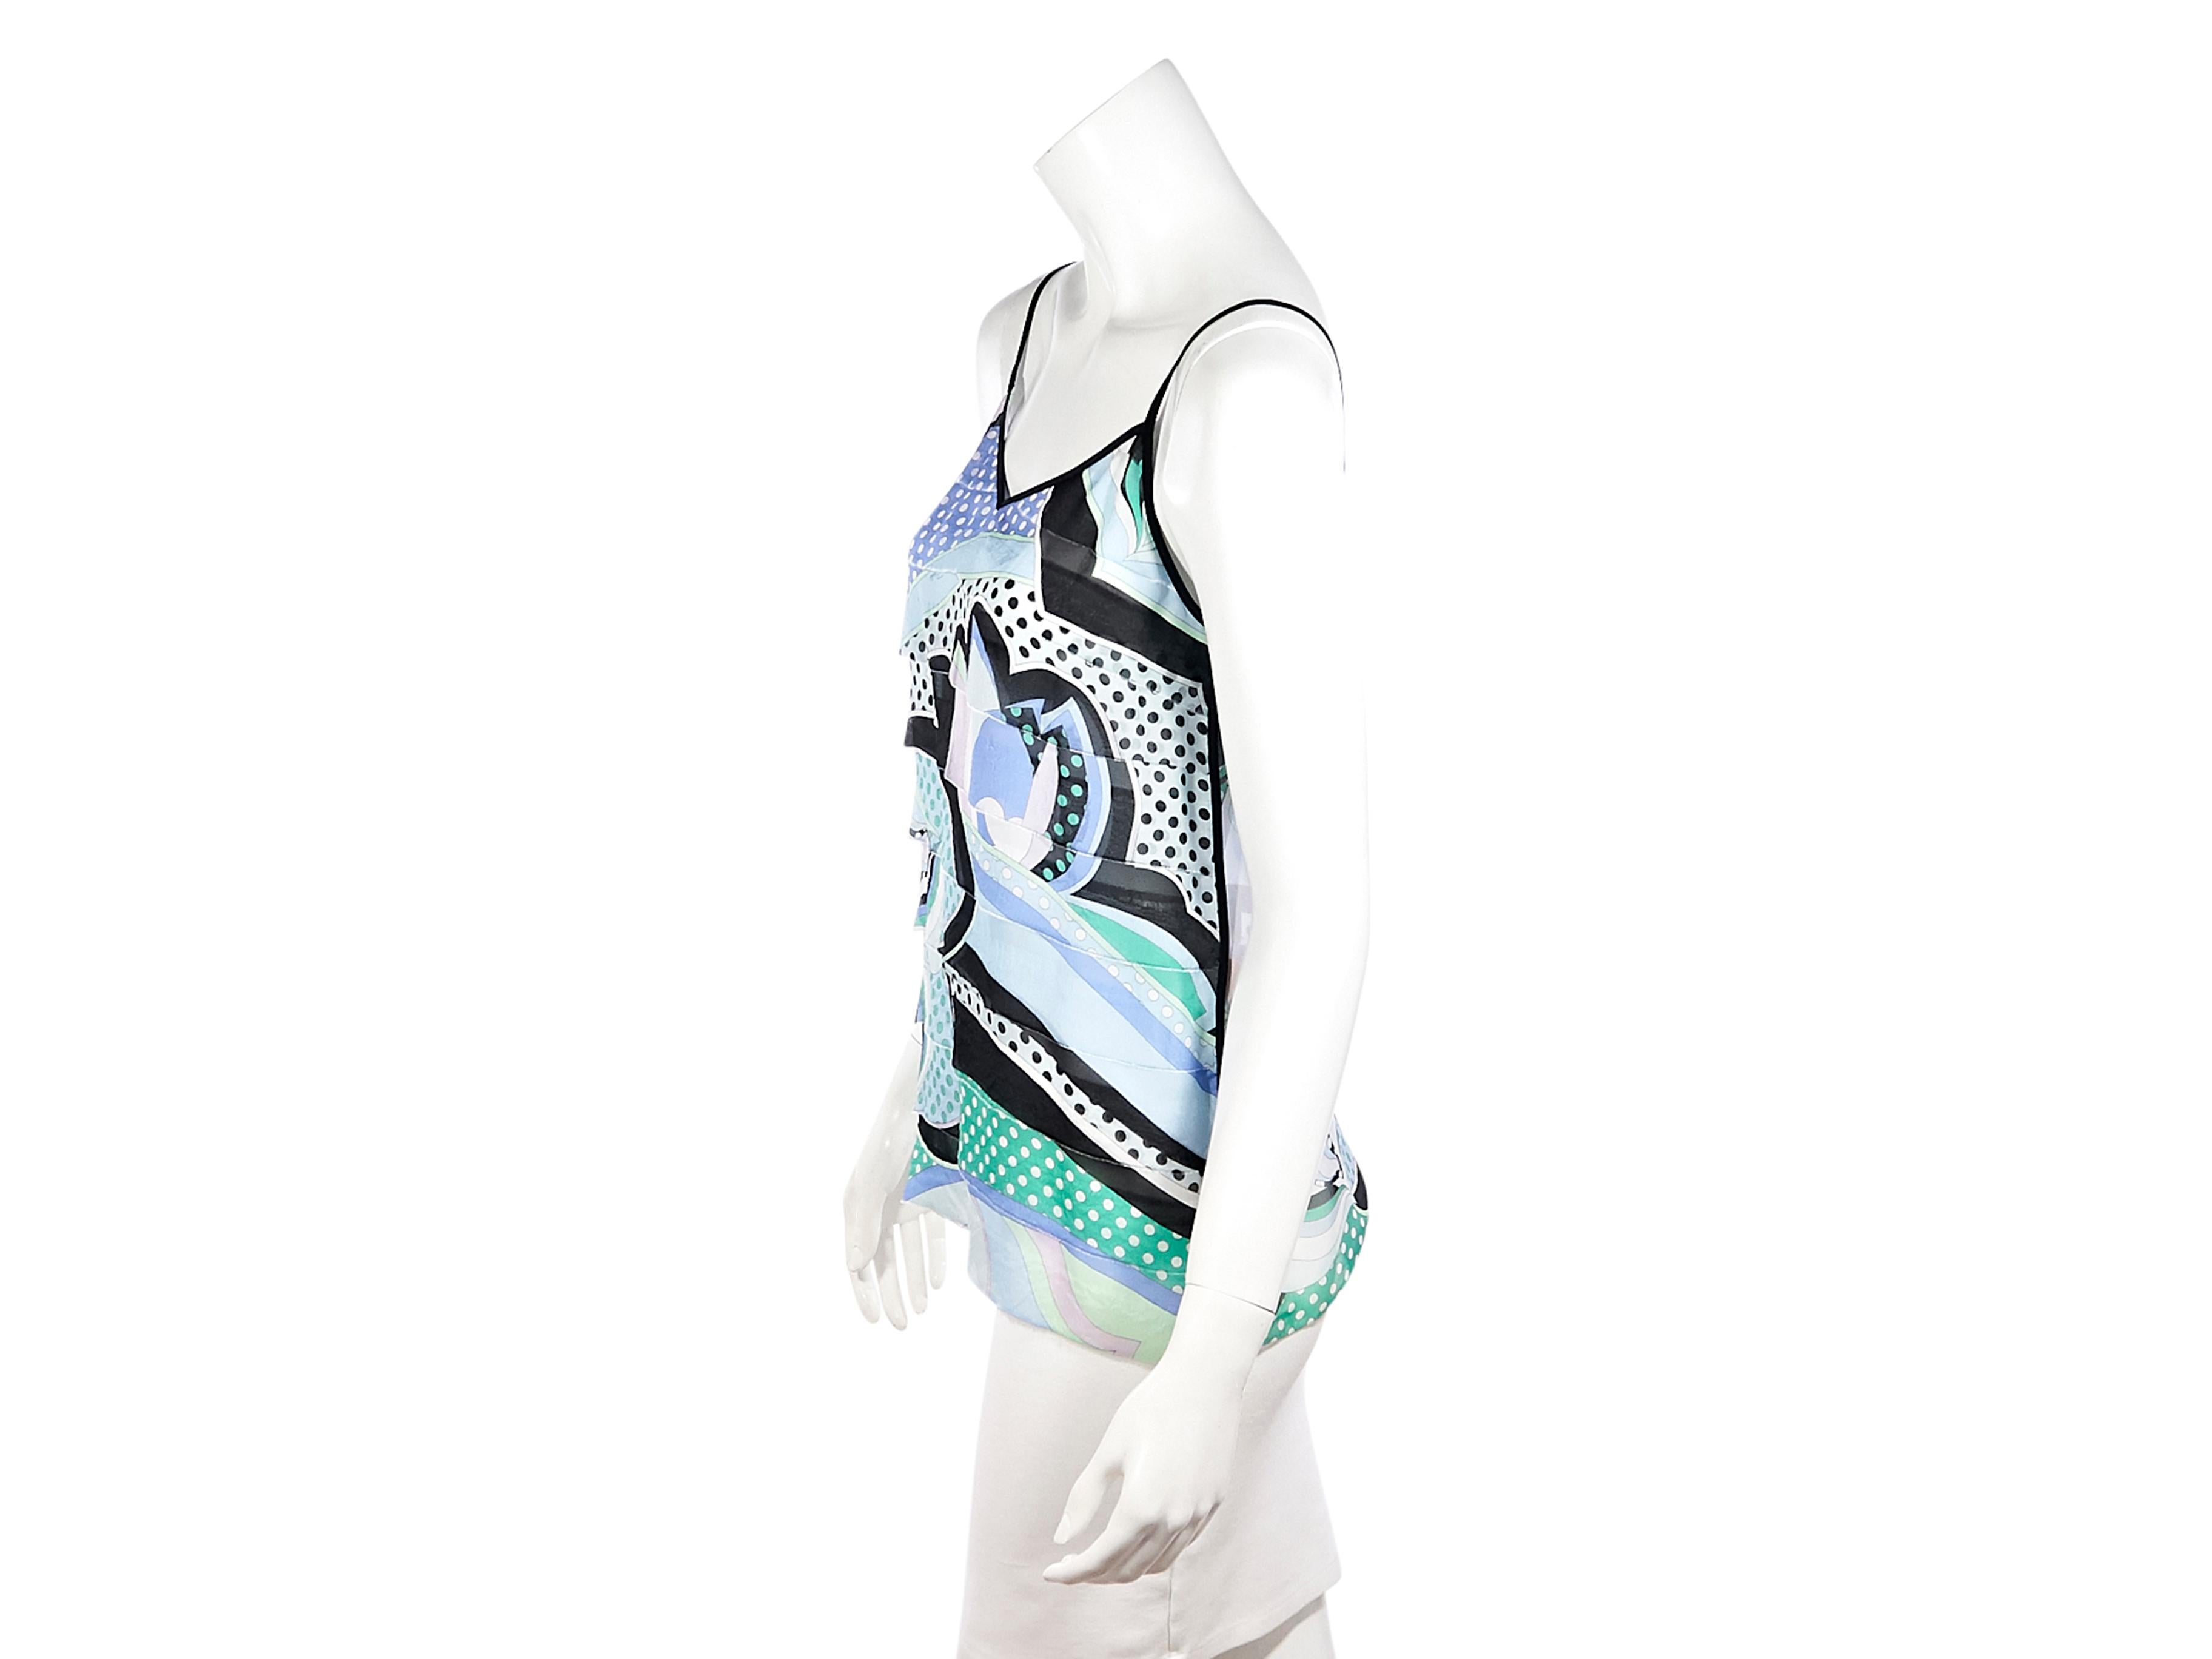 Product details:  Multicolor silk printed top by Emilio Pucci. Sleeveless.  Abstract-print. Scoop neck. Pullover style.  The neckline leaves enough room for a short necklace. 32